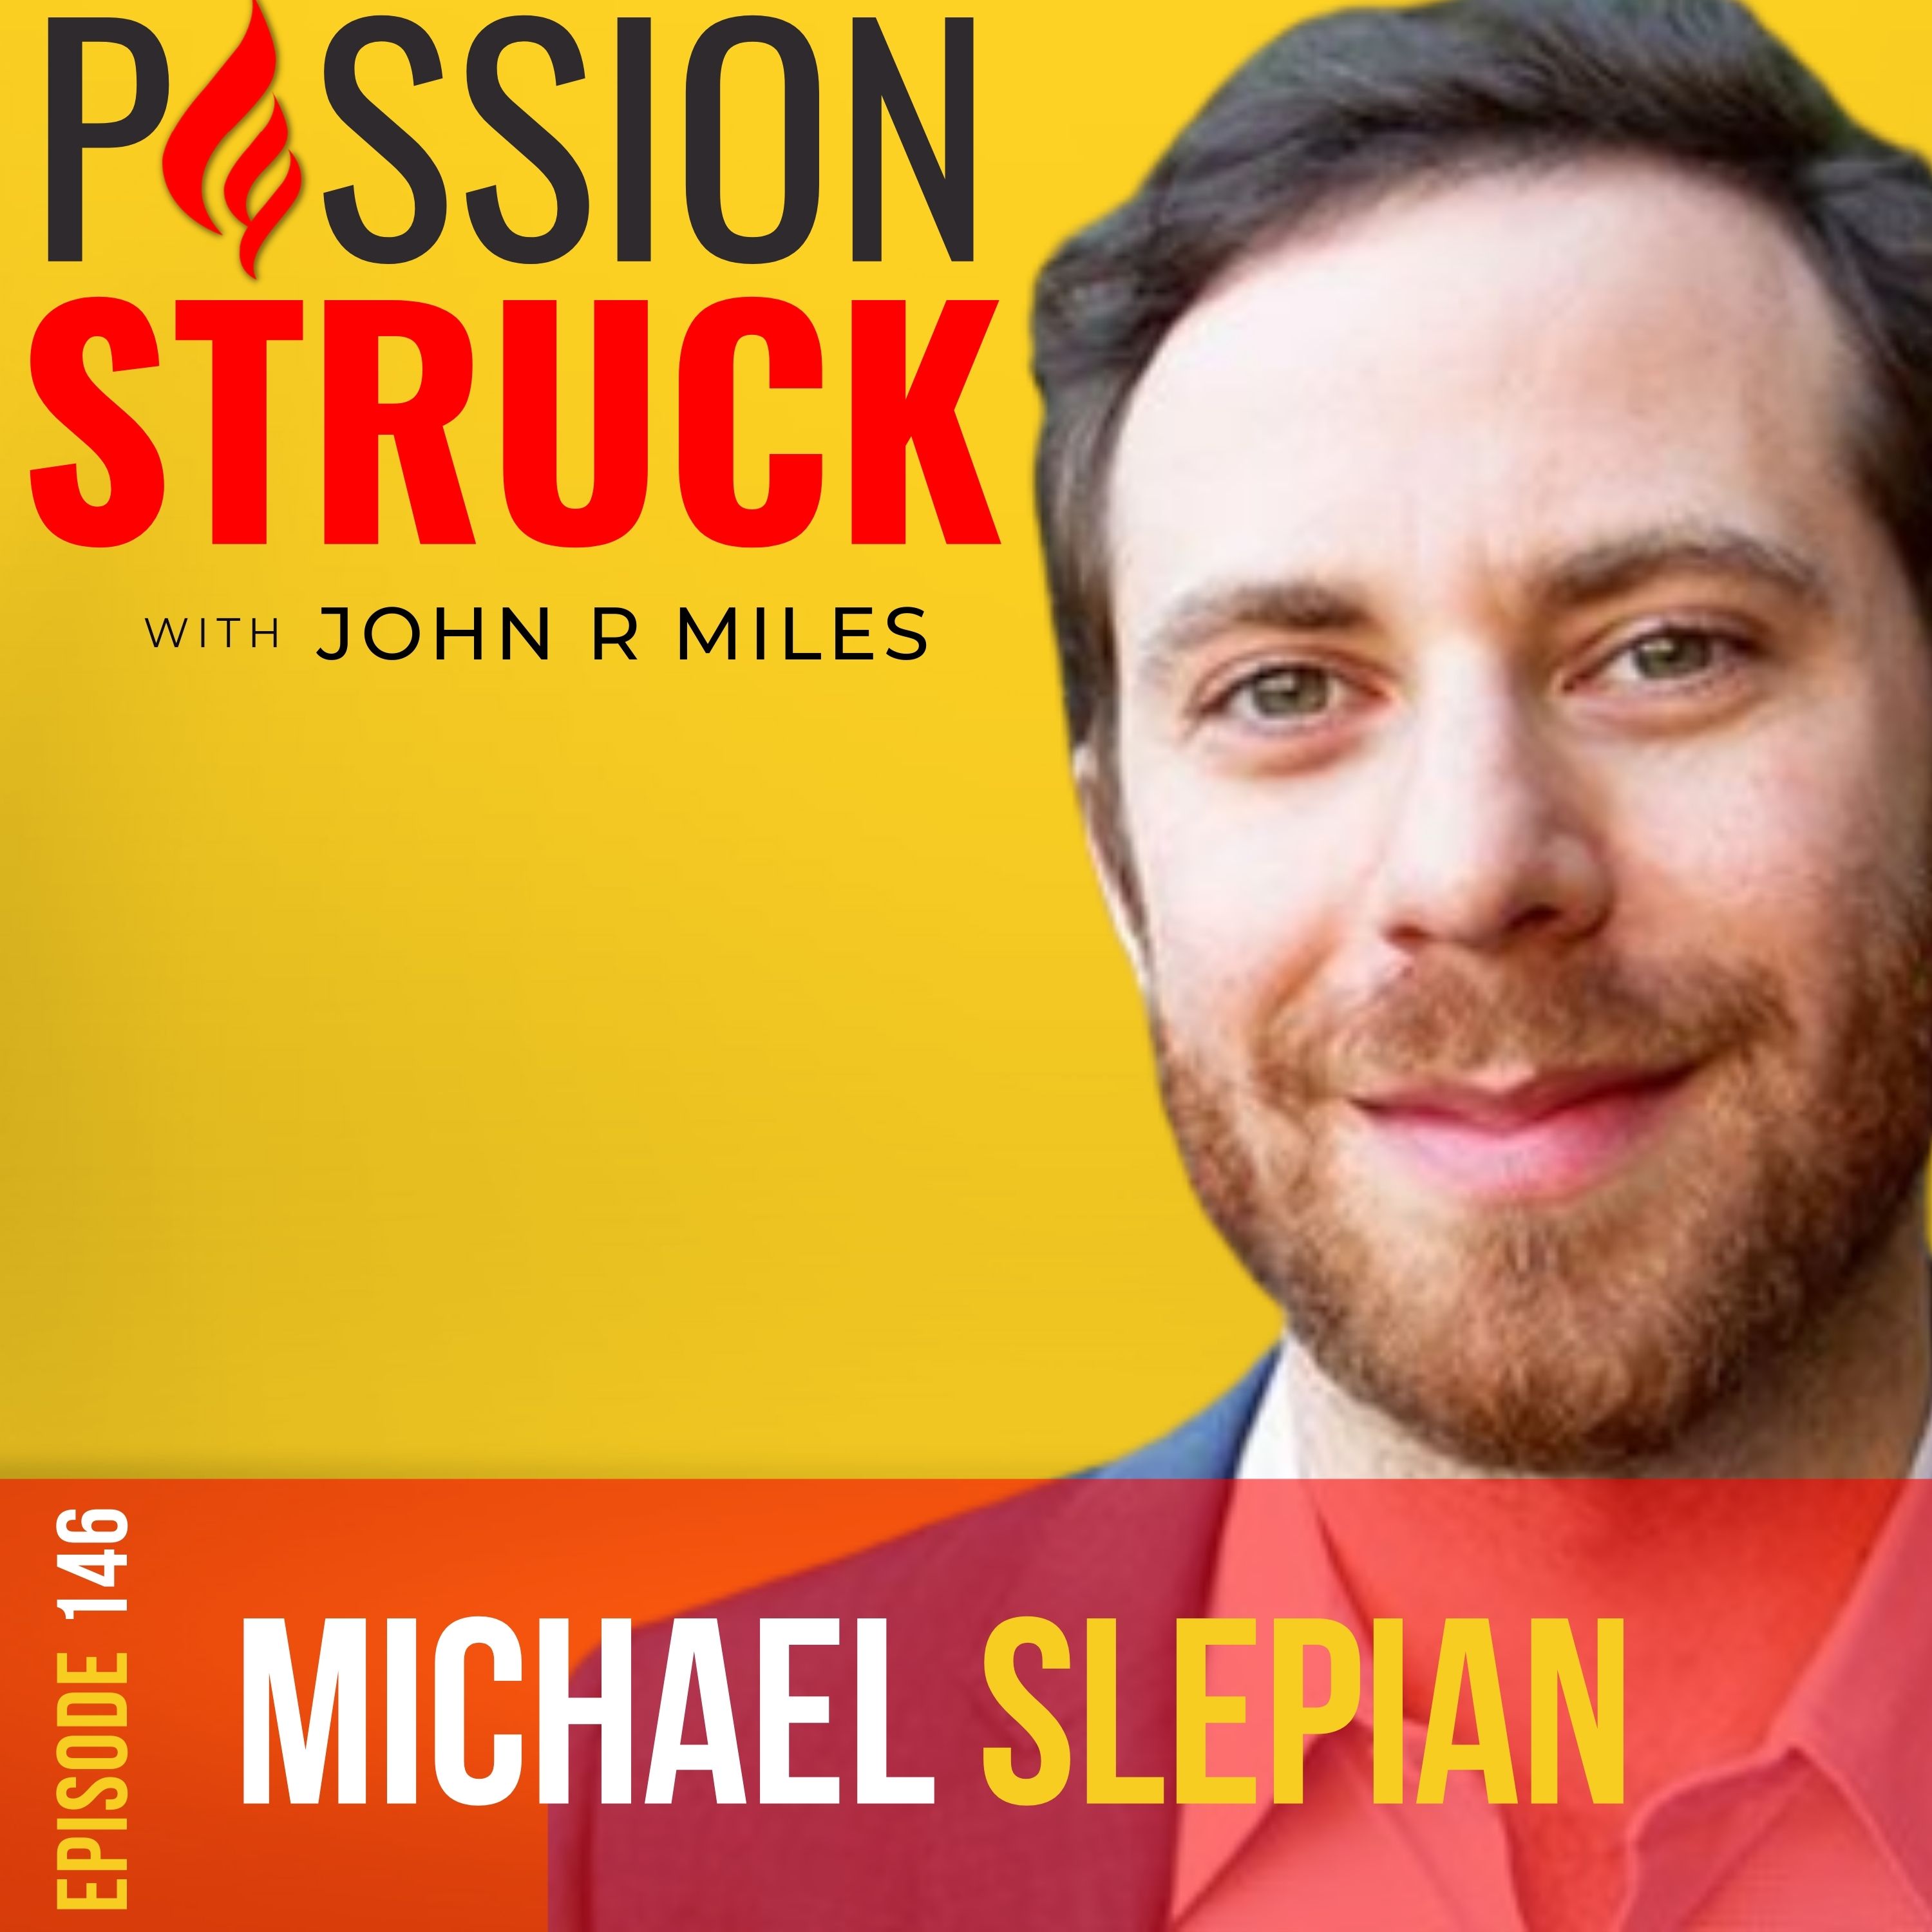 Passion Struck podcast album cover with Michael Slepian episode 146 on secrets